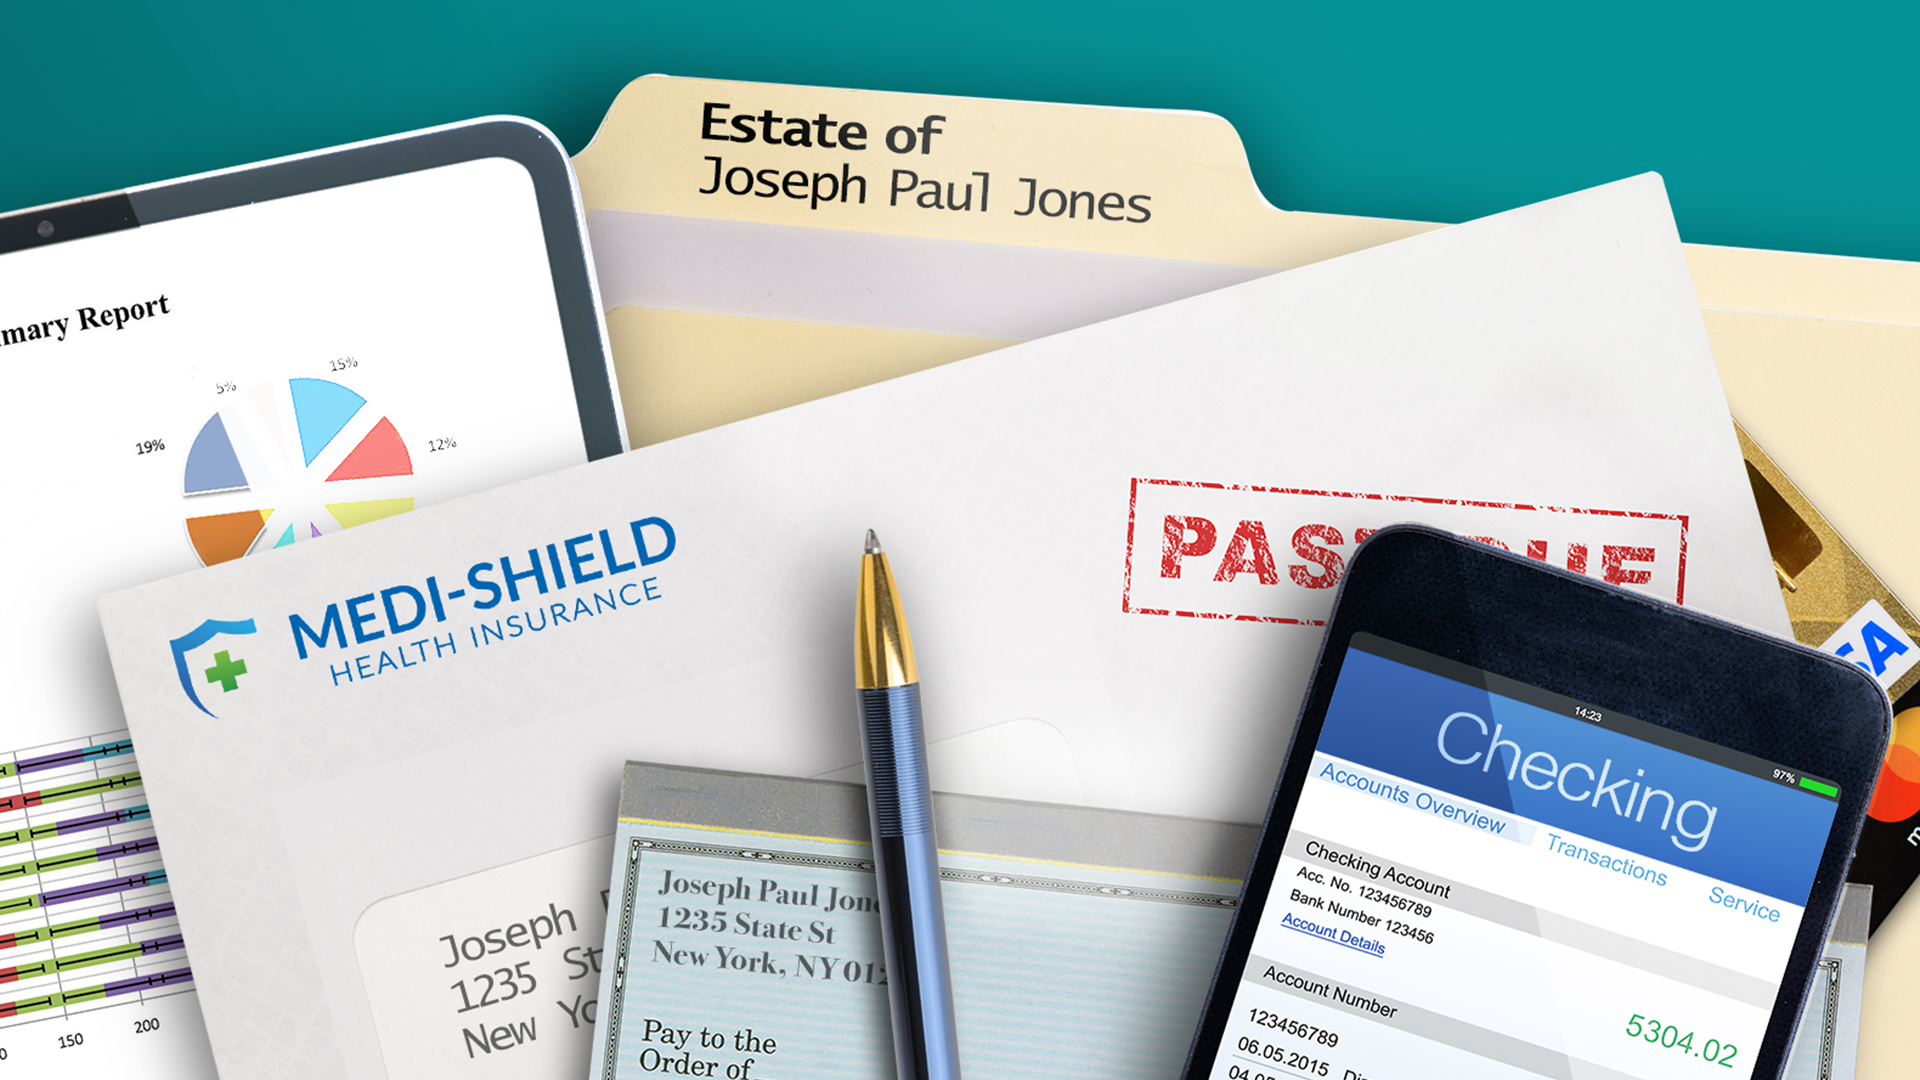 Tools and paperwork for handling estate's finances.